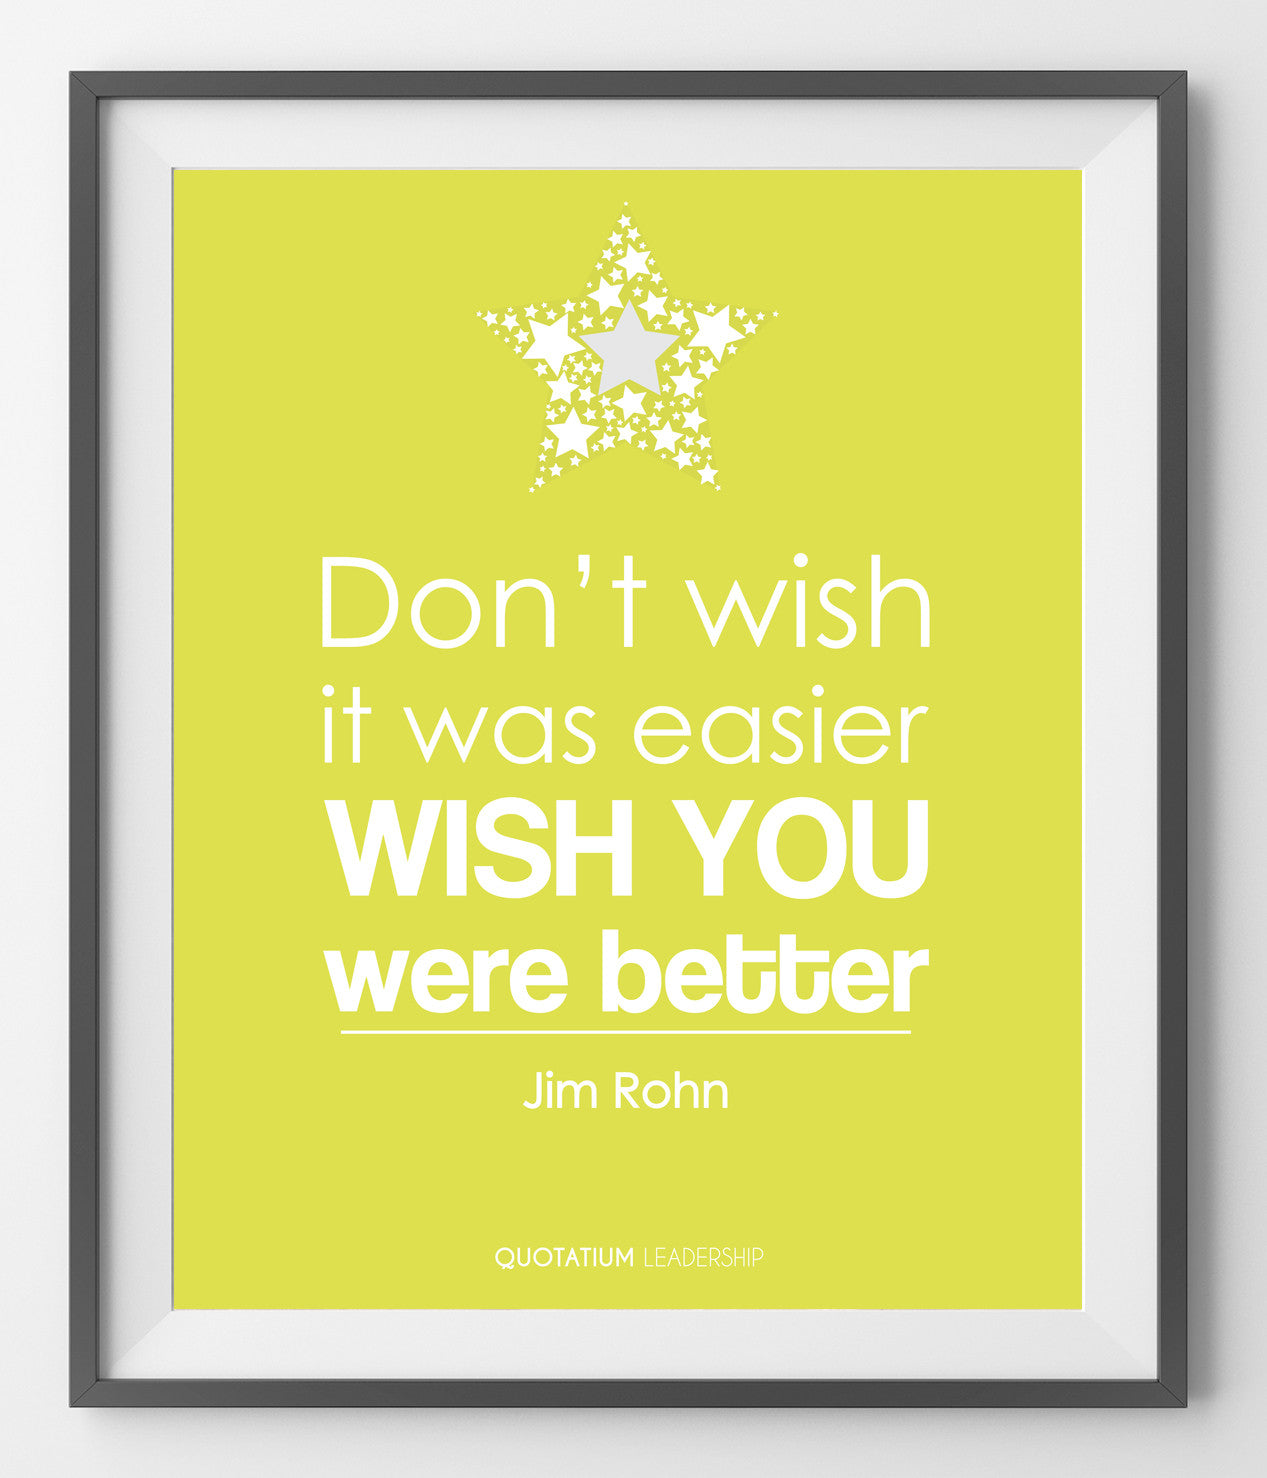 Don't wish it was easier, wish you were better - QUOTATIUM - 1